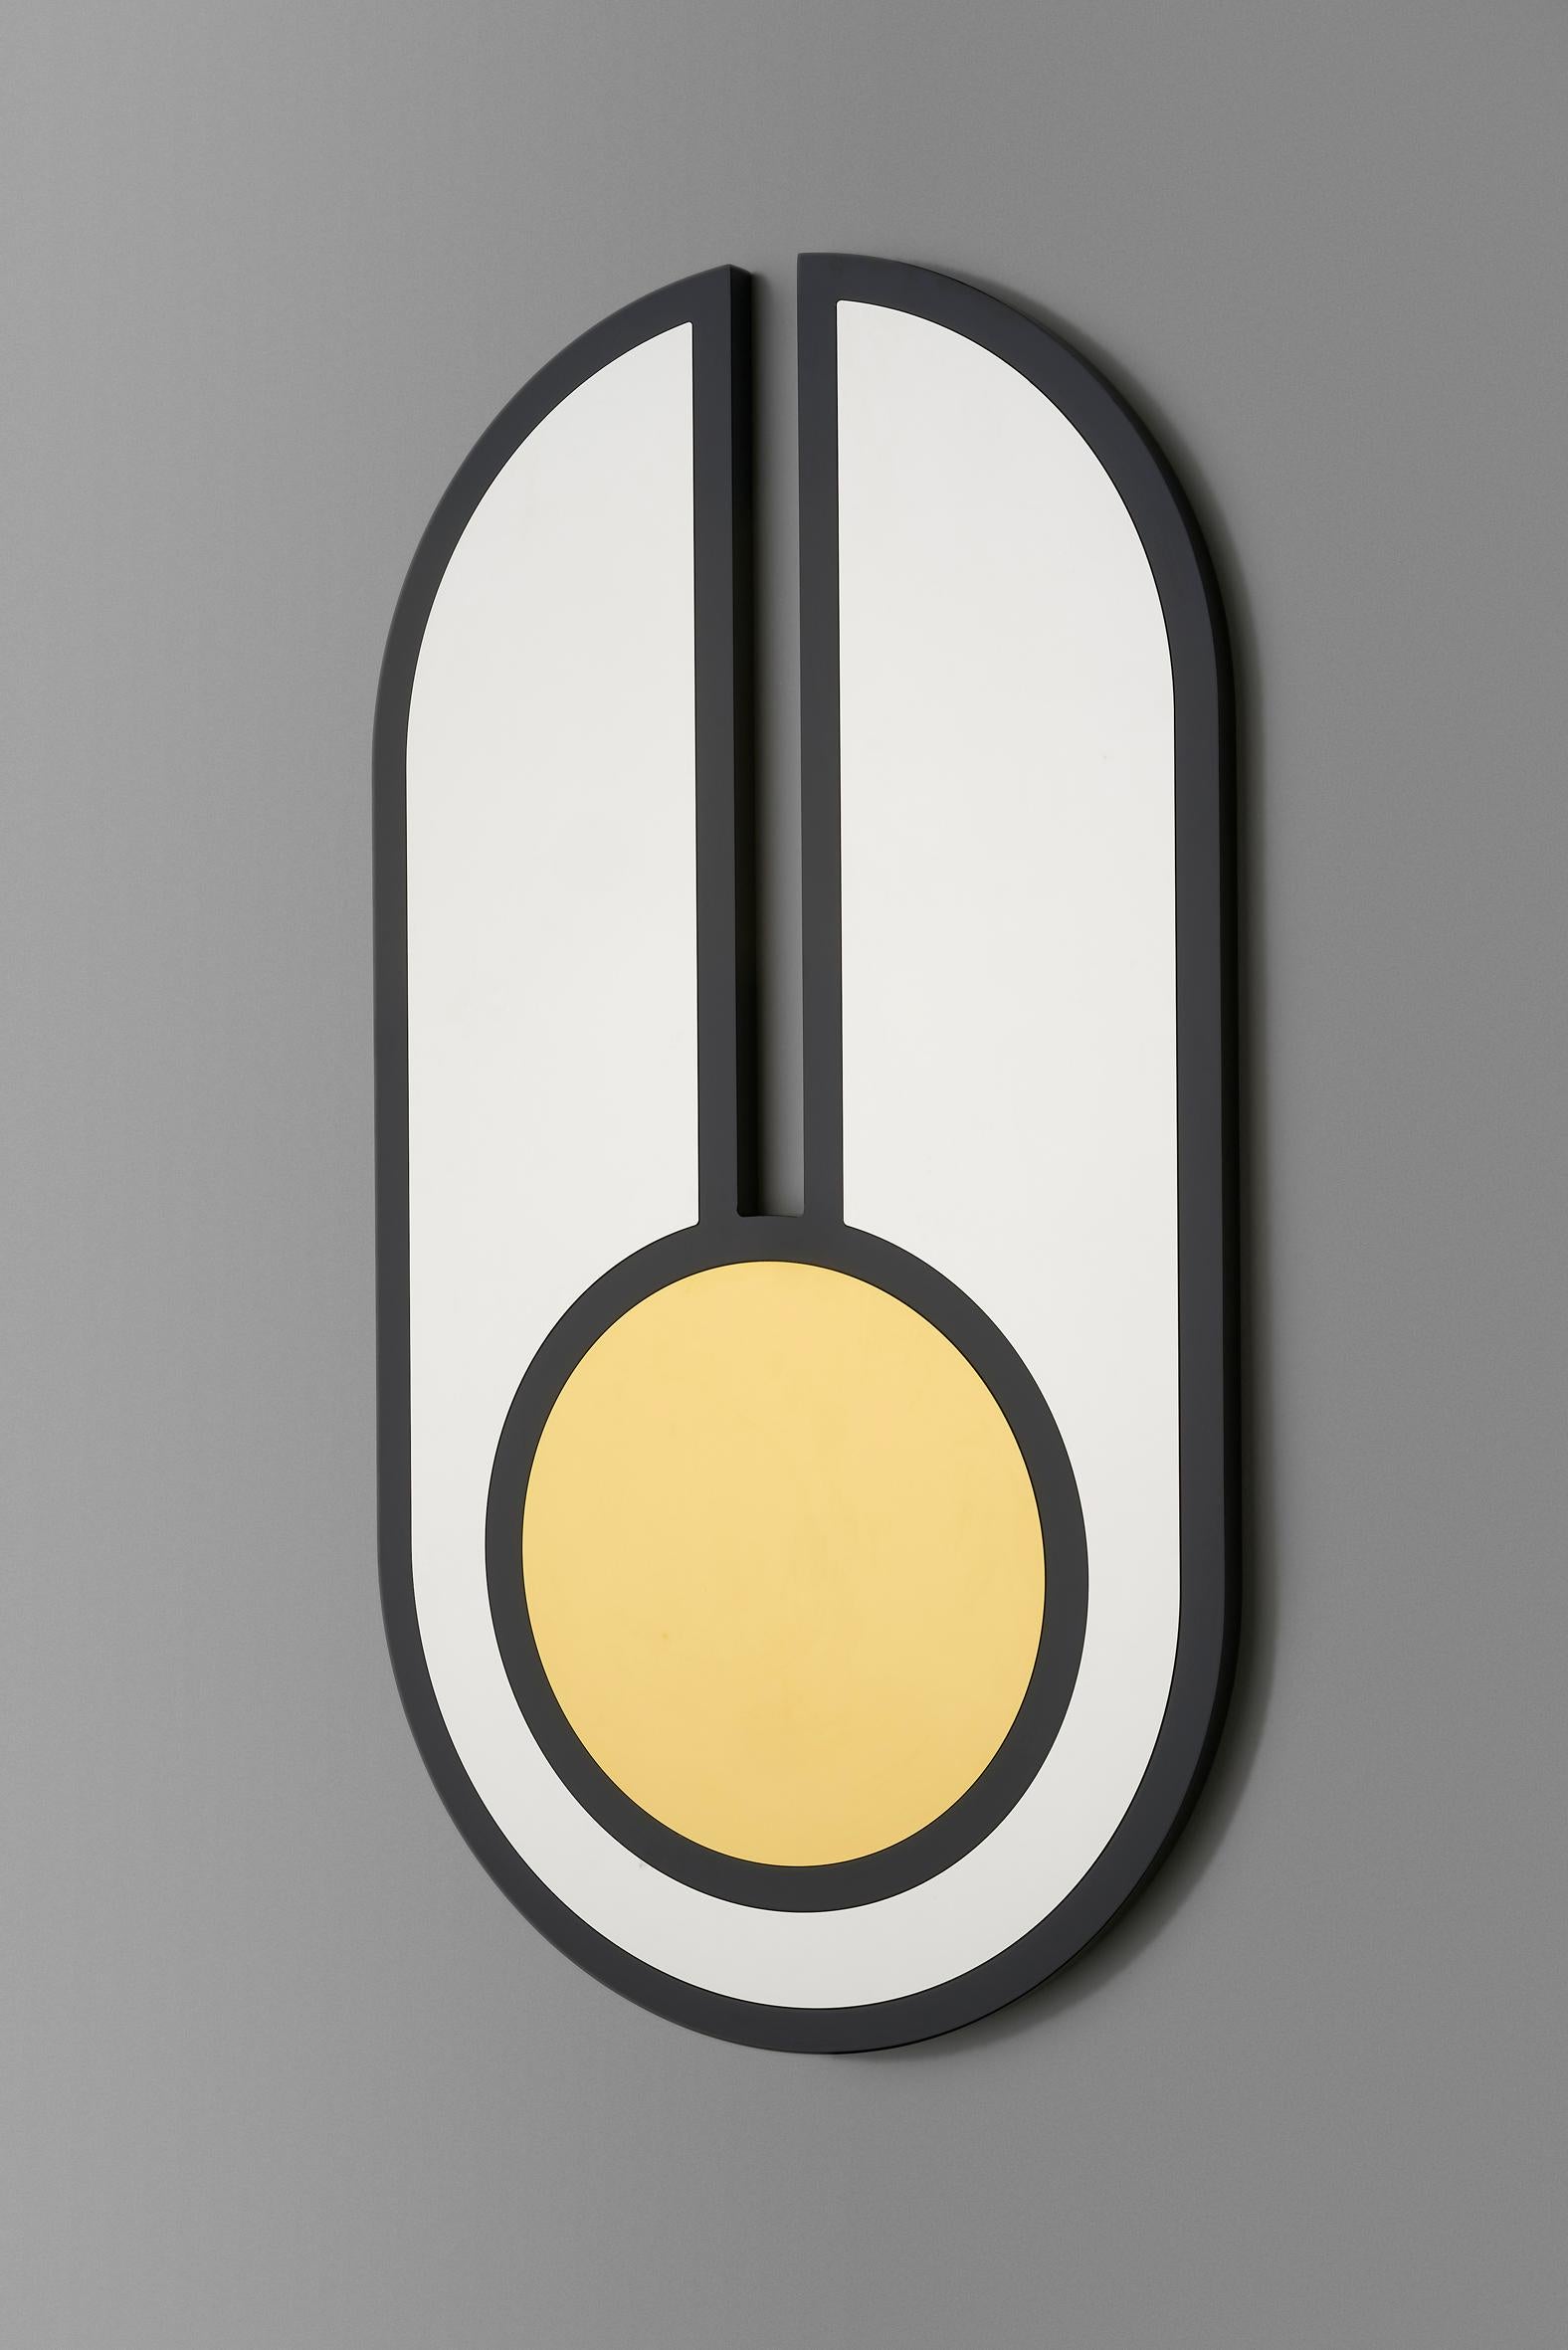 Circle and oval forms unite to create the graphic Everything is Golden mirror series. 

No. 3 features a black gloss lacquered frame inset with gold and silver mirrored stainless steel. 

3 no keyhole fixings to rear allow the mirror to be hung